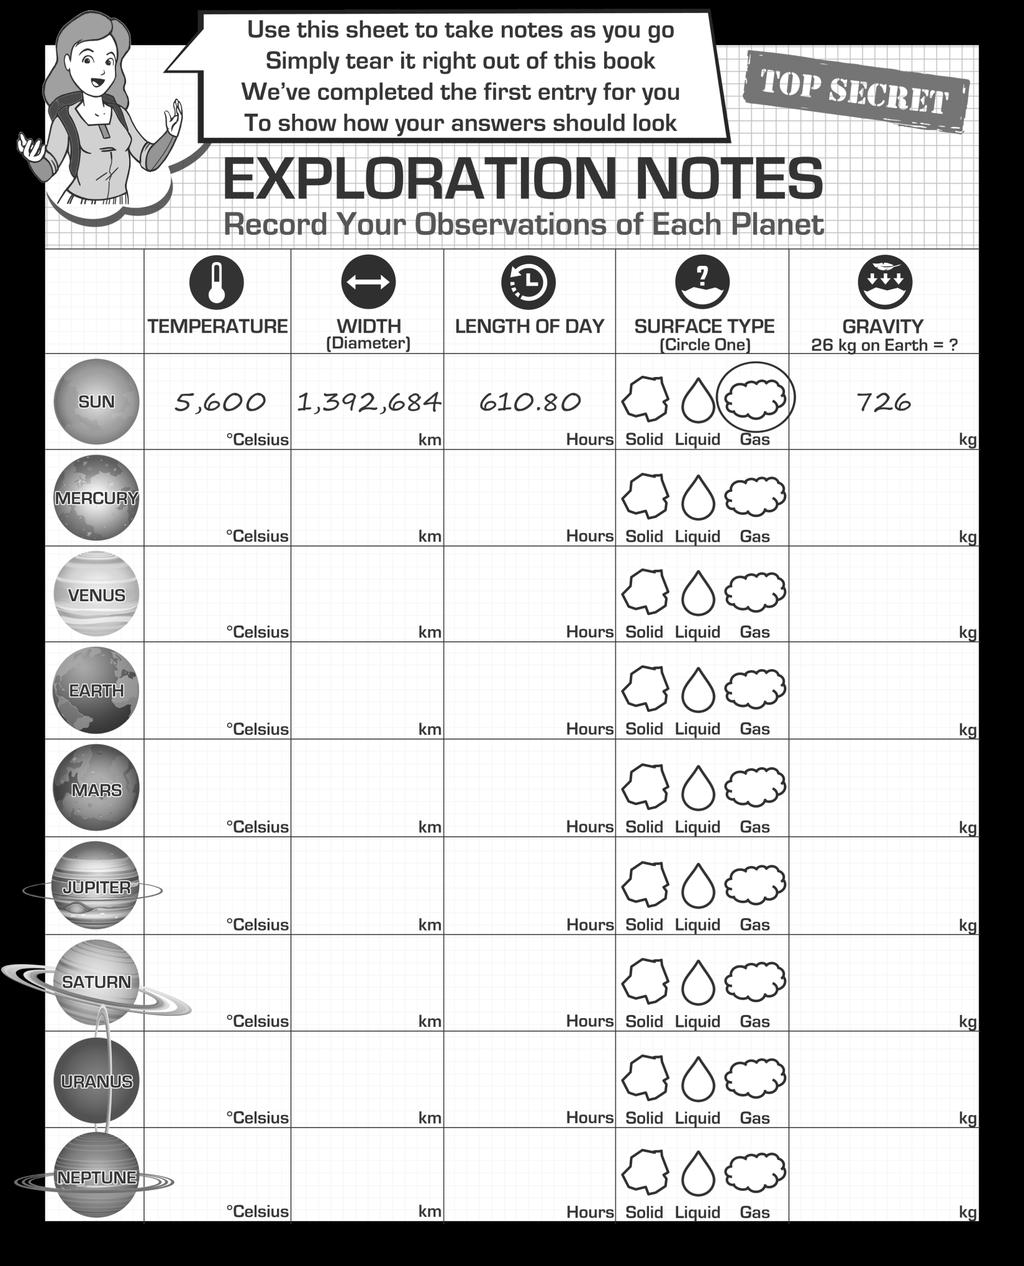 9 Use this sheet to take notes as you explore each planet.